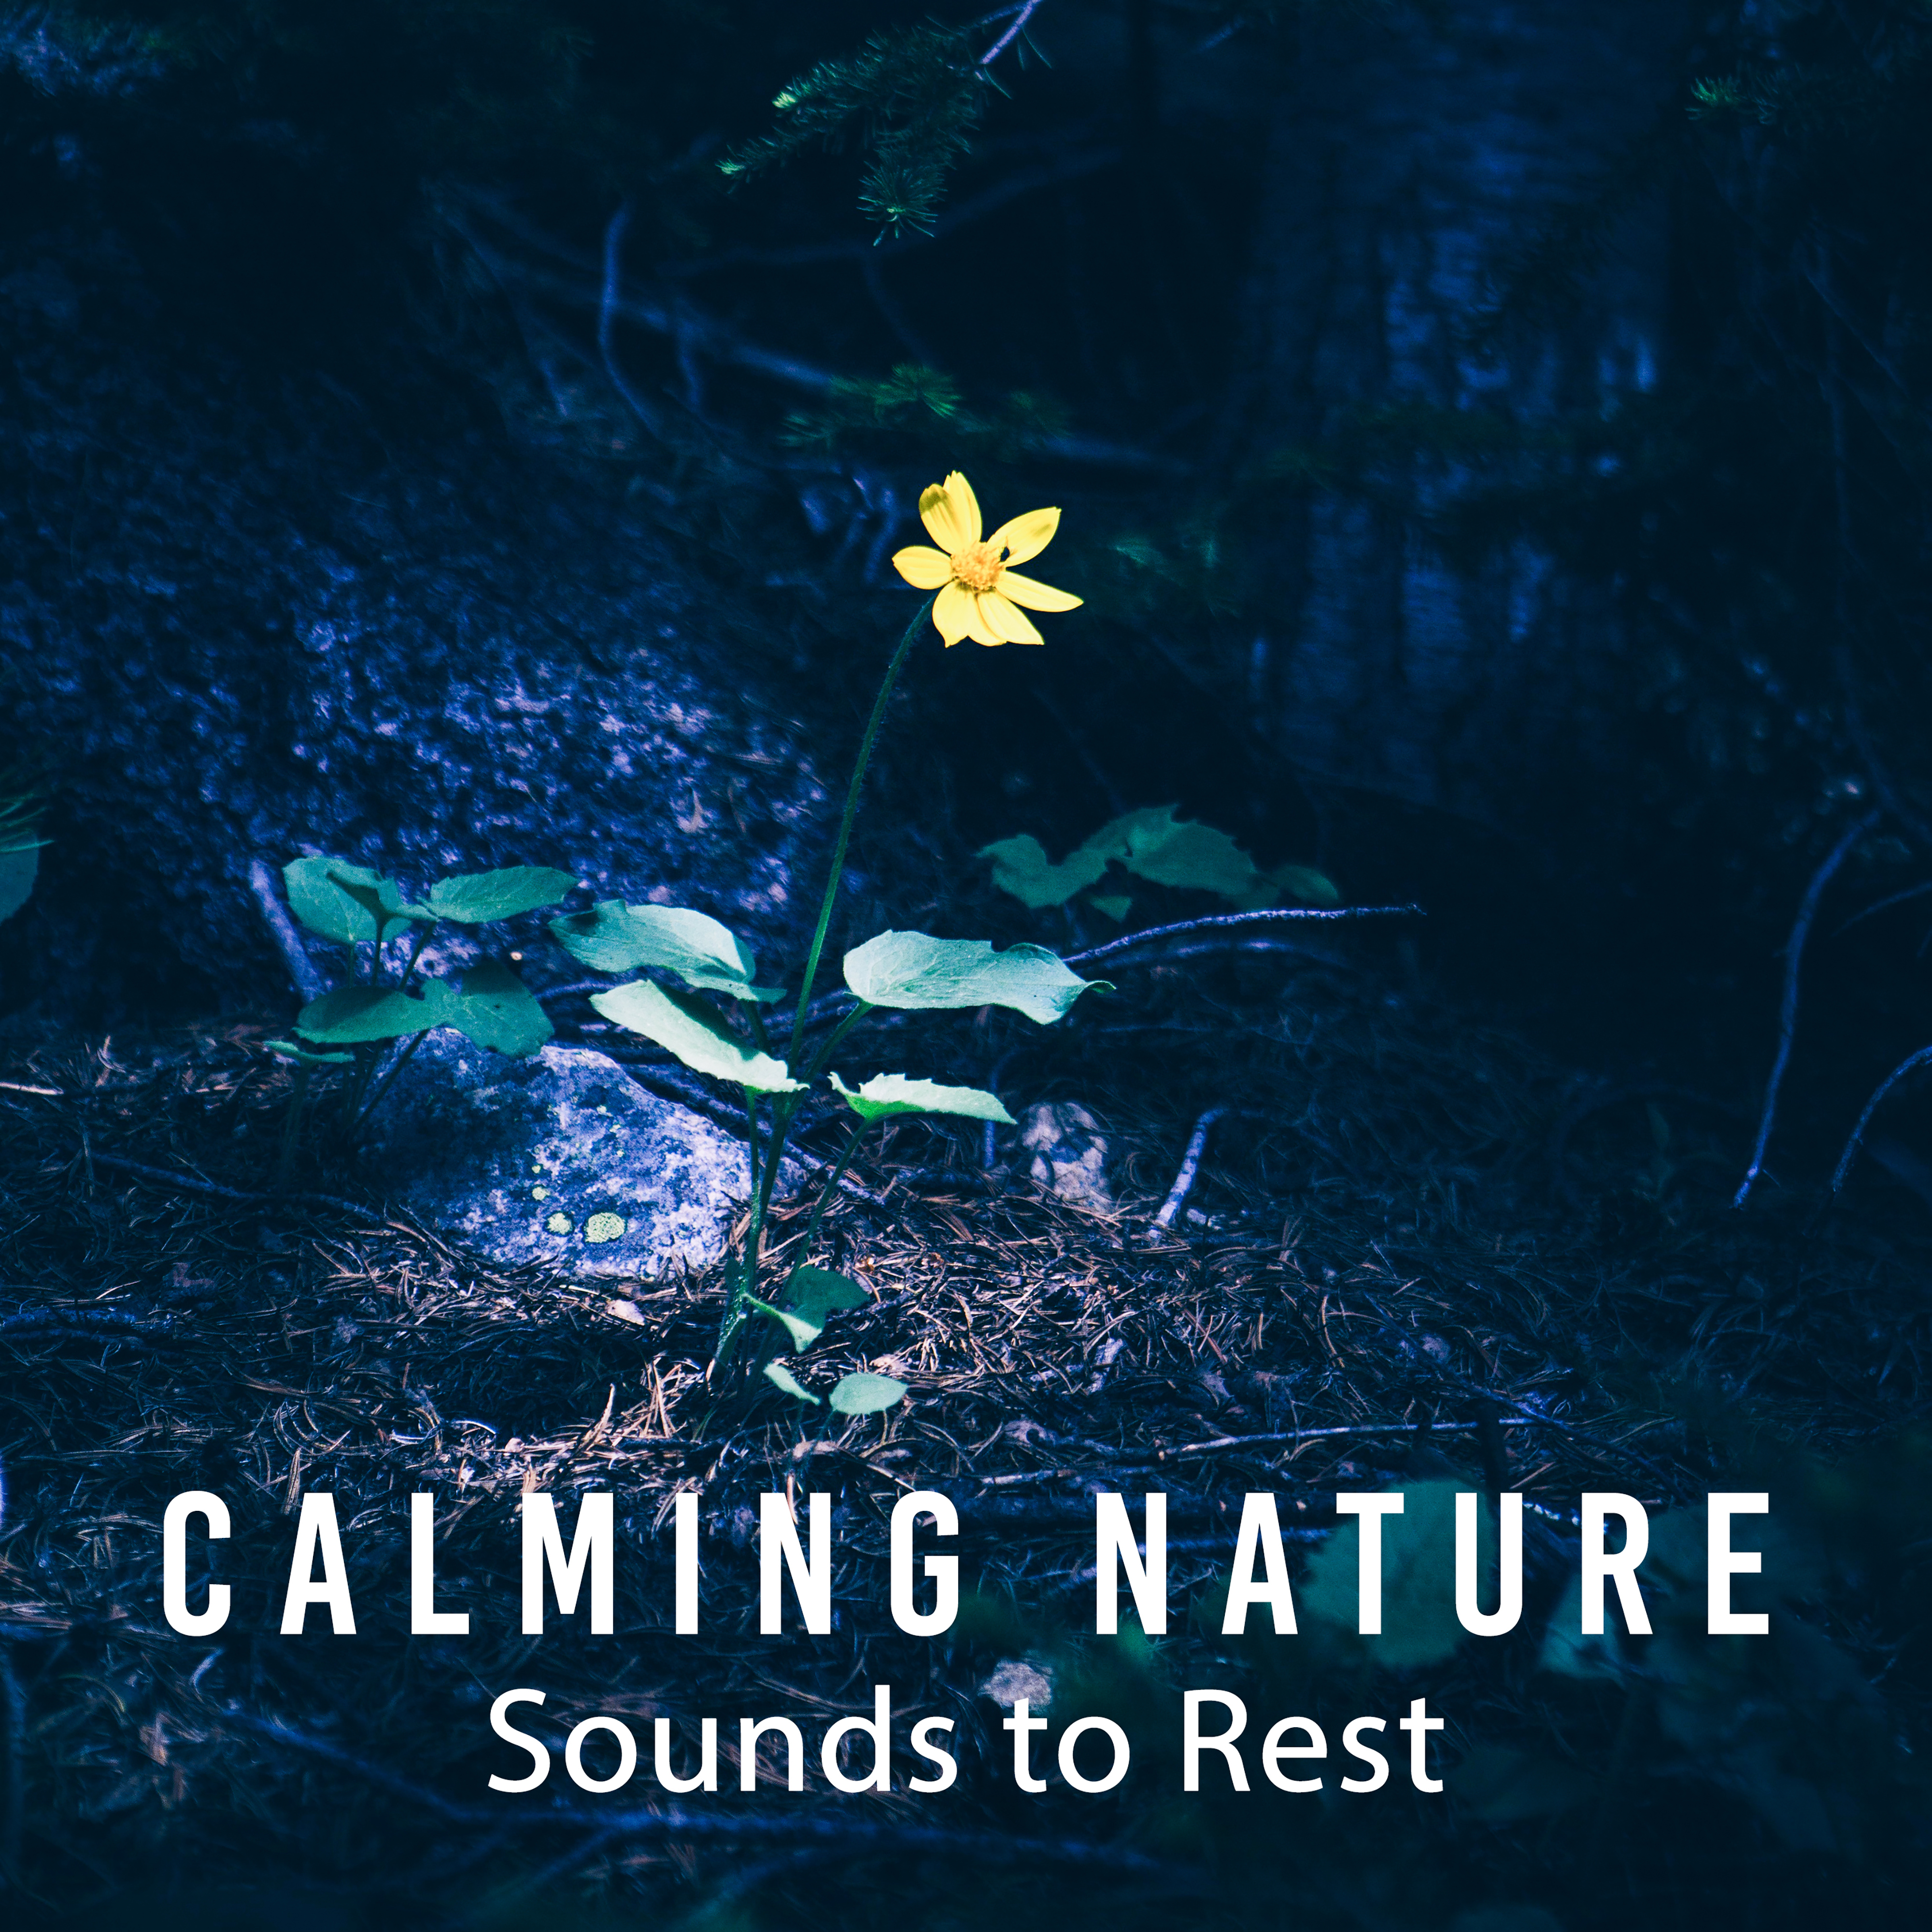 Calming Nature Sounds to Rest  Chilled Moments, Beautiful Nature Music, Sounds to Rest  Relax, New Age Healing Music